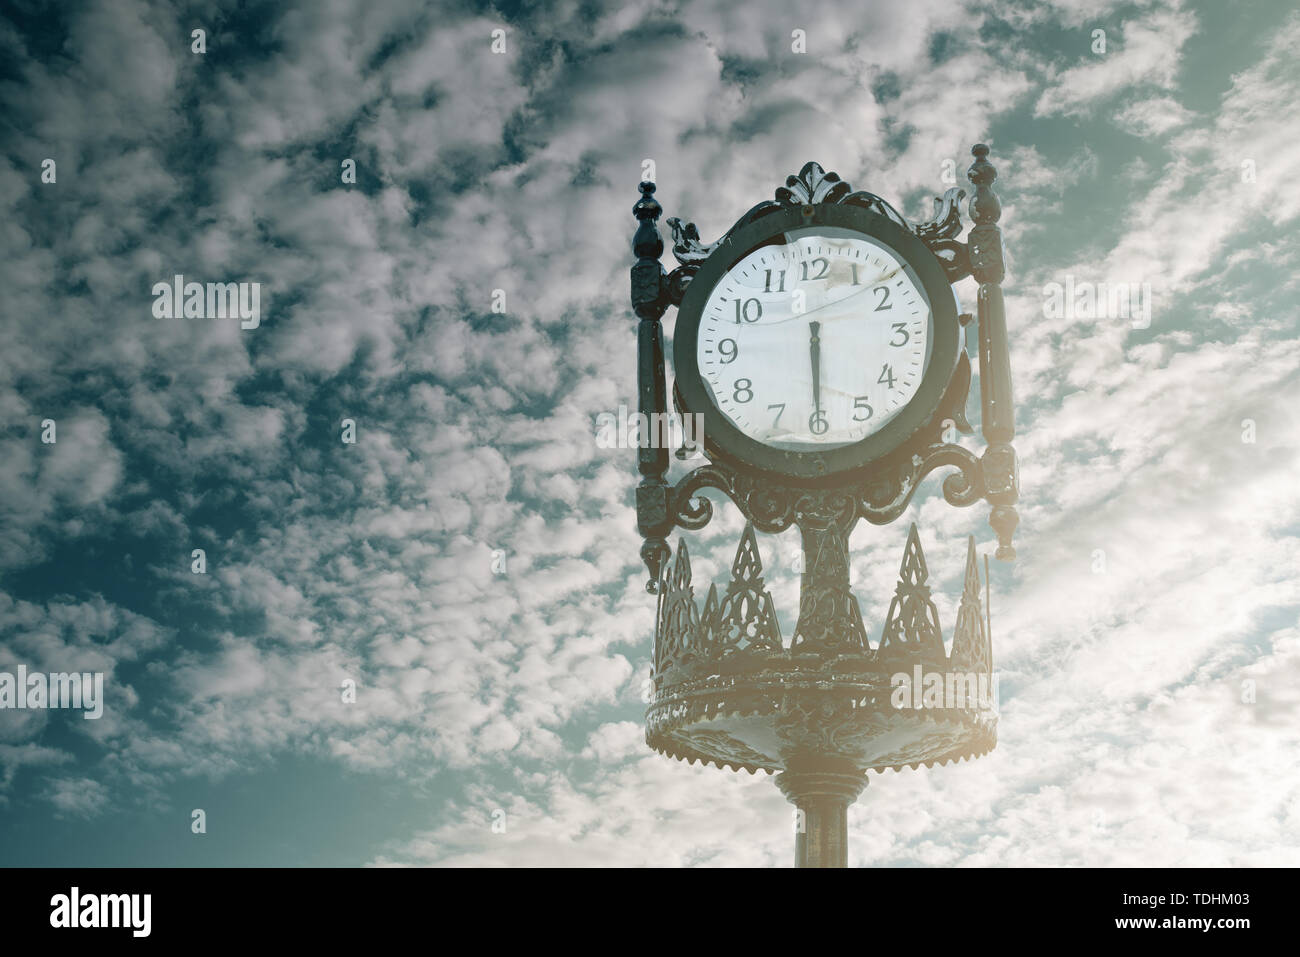 Vintage analogue clock against sunset with beautiful clouds Stock Photo